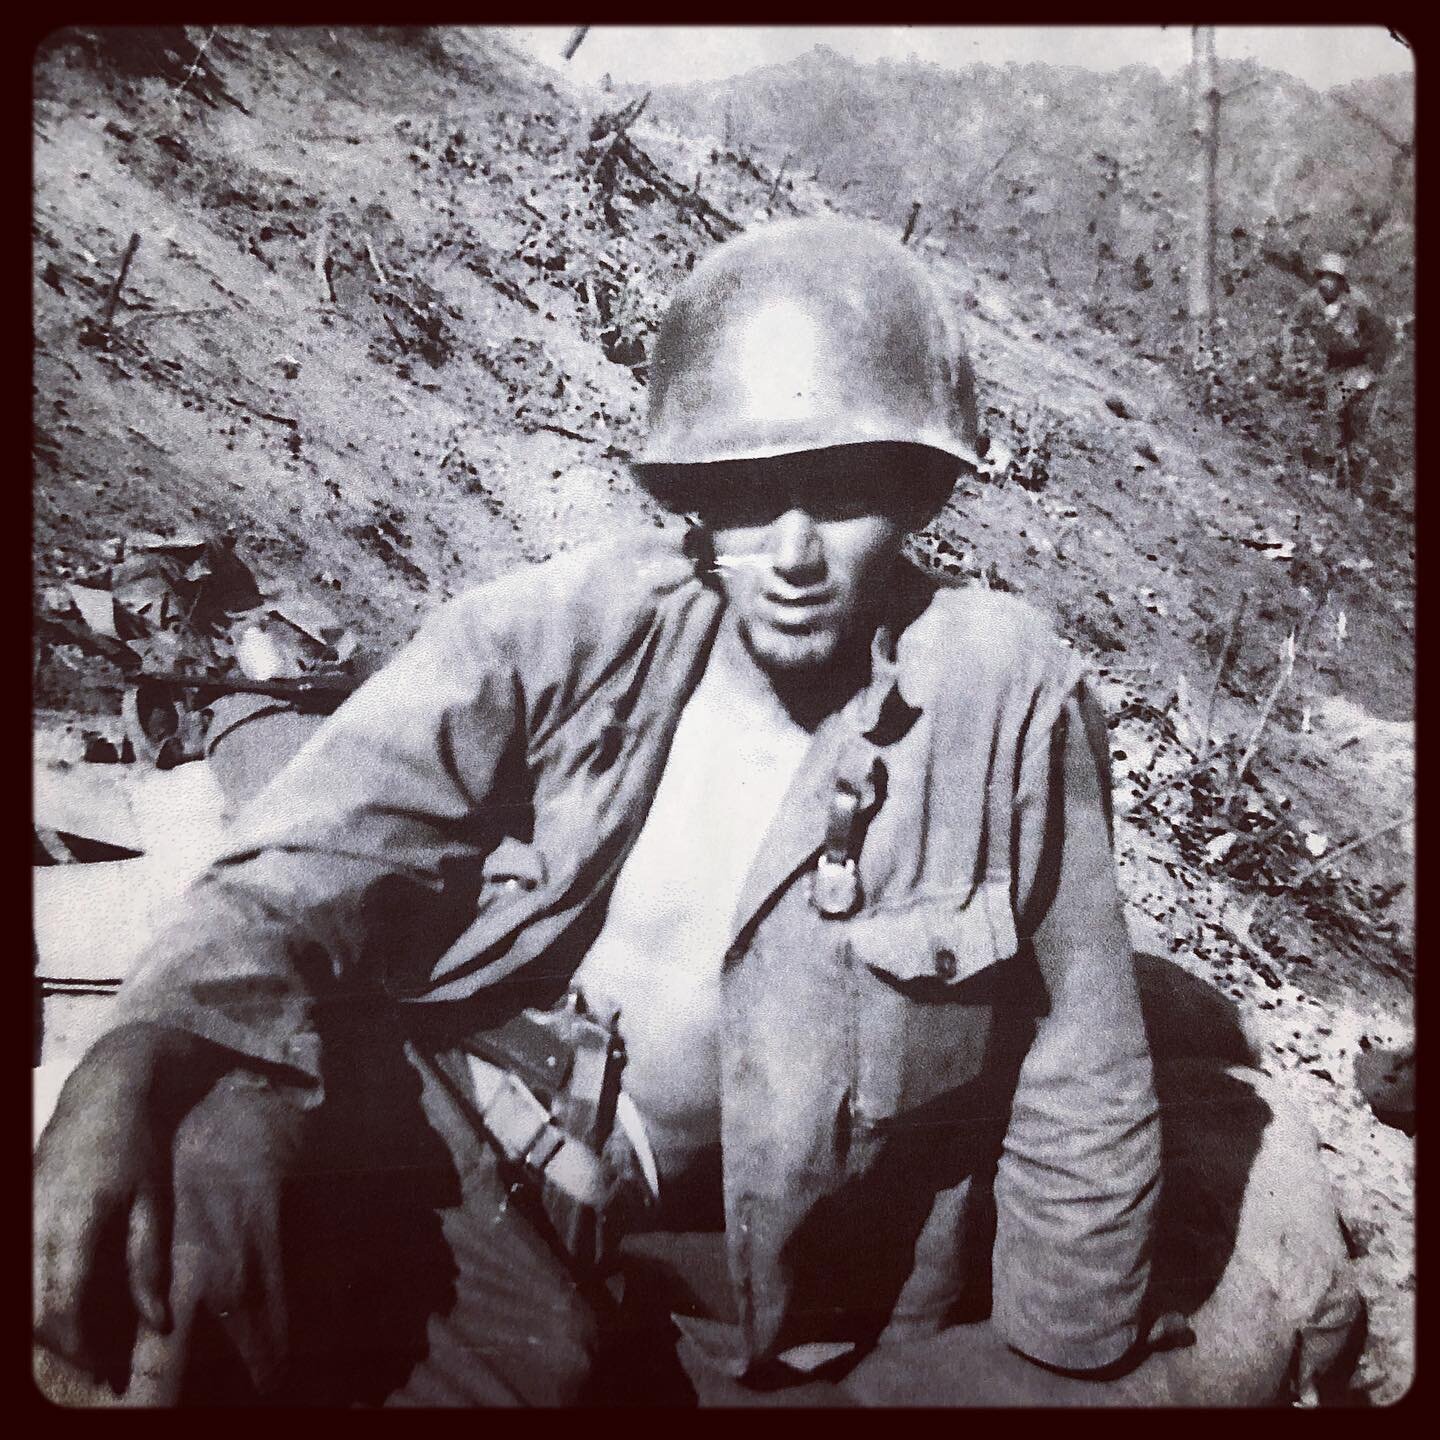 Remembering my late grandfather John Davis on Veteran&rsquo;s Day. Seen here sitting on a blown up hillside after fighting a 10 day battle in the Korean War. He told me a story about a time a bullet struck the brim of his helmet, spinning it around o